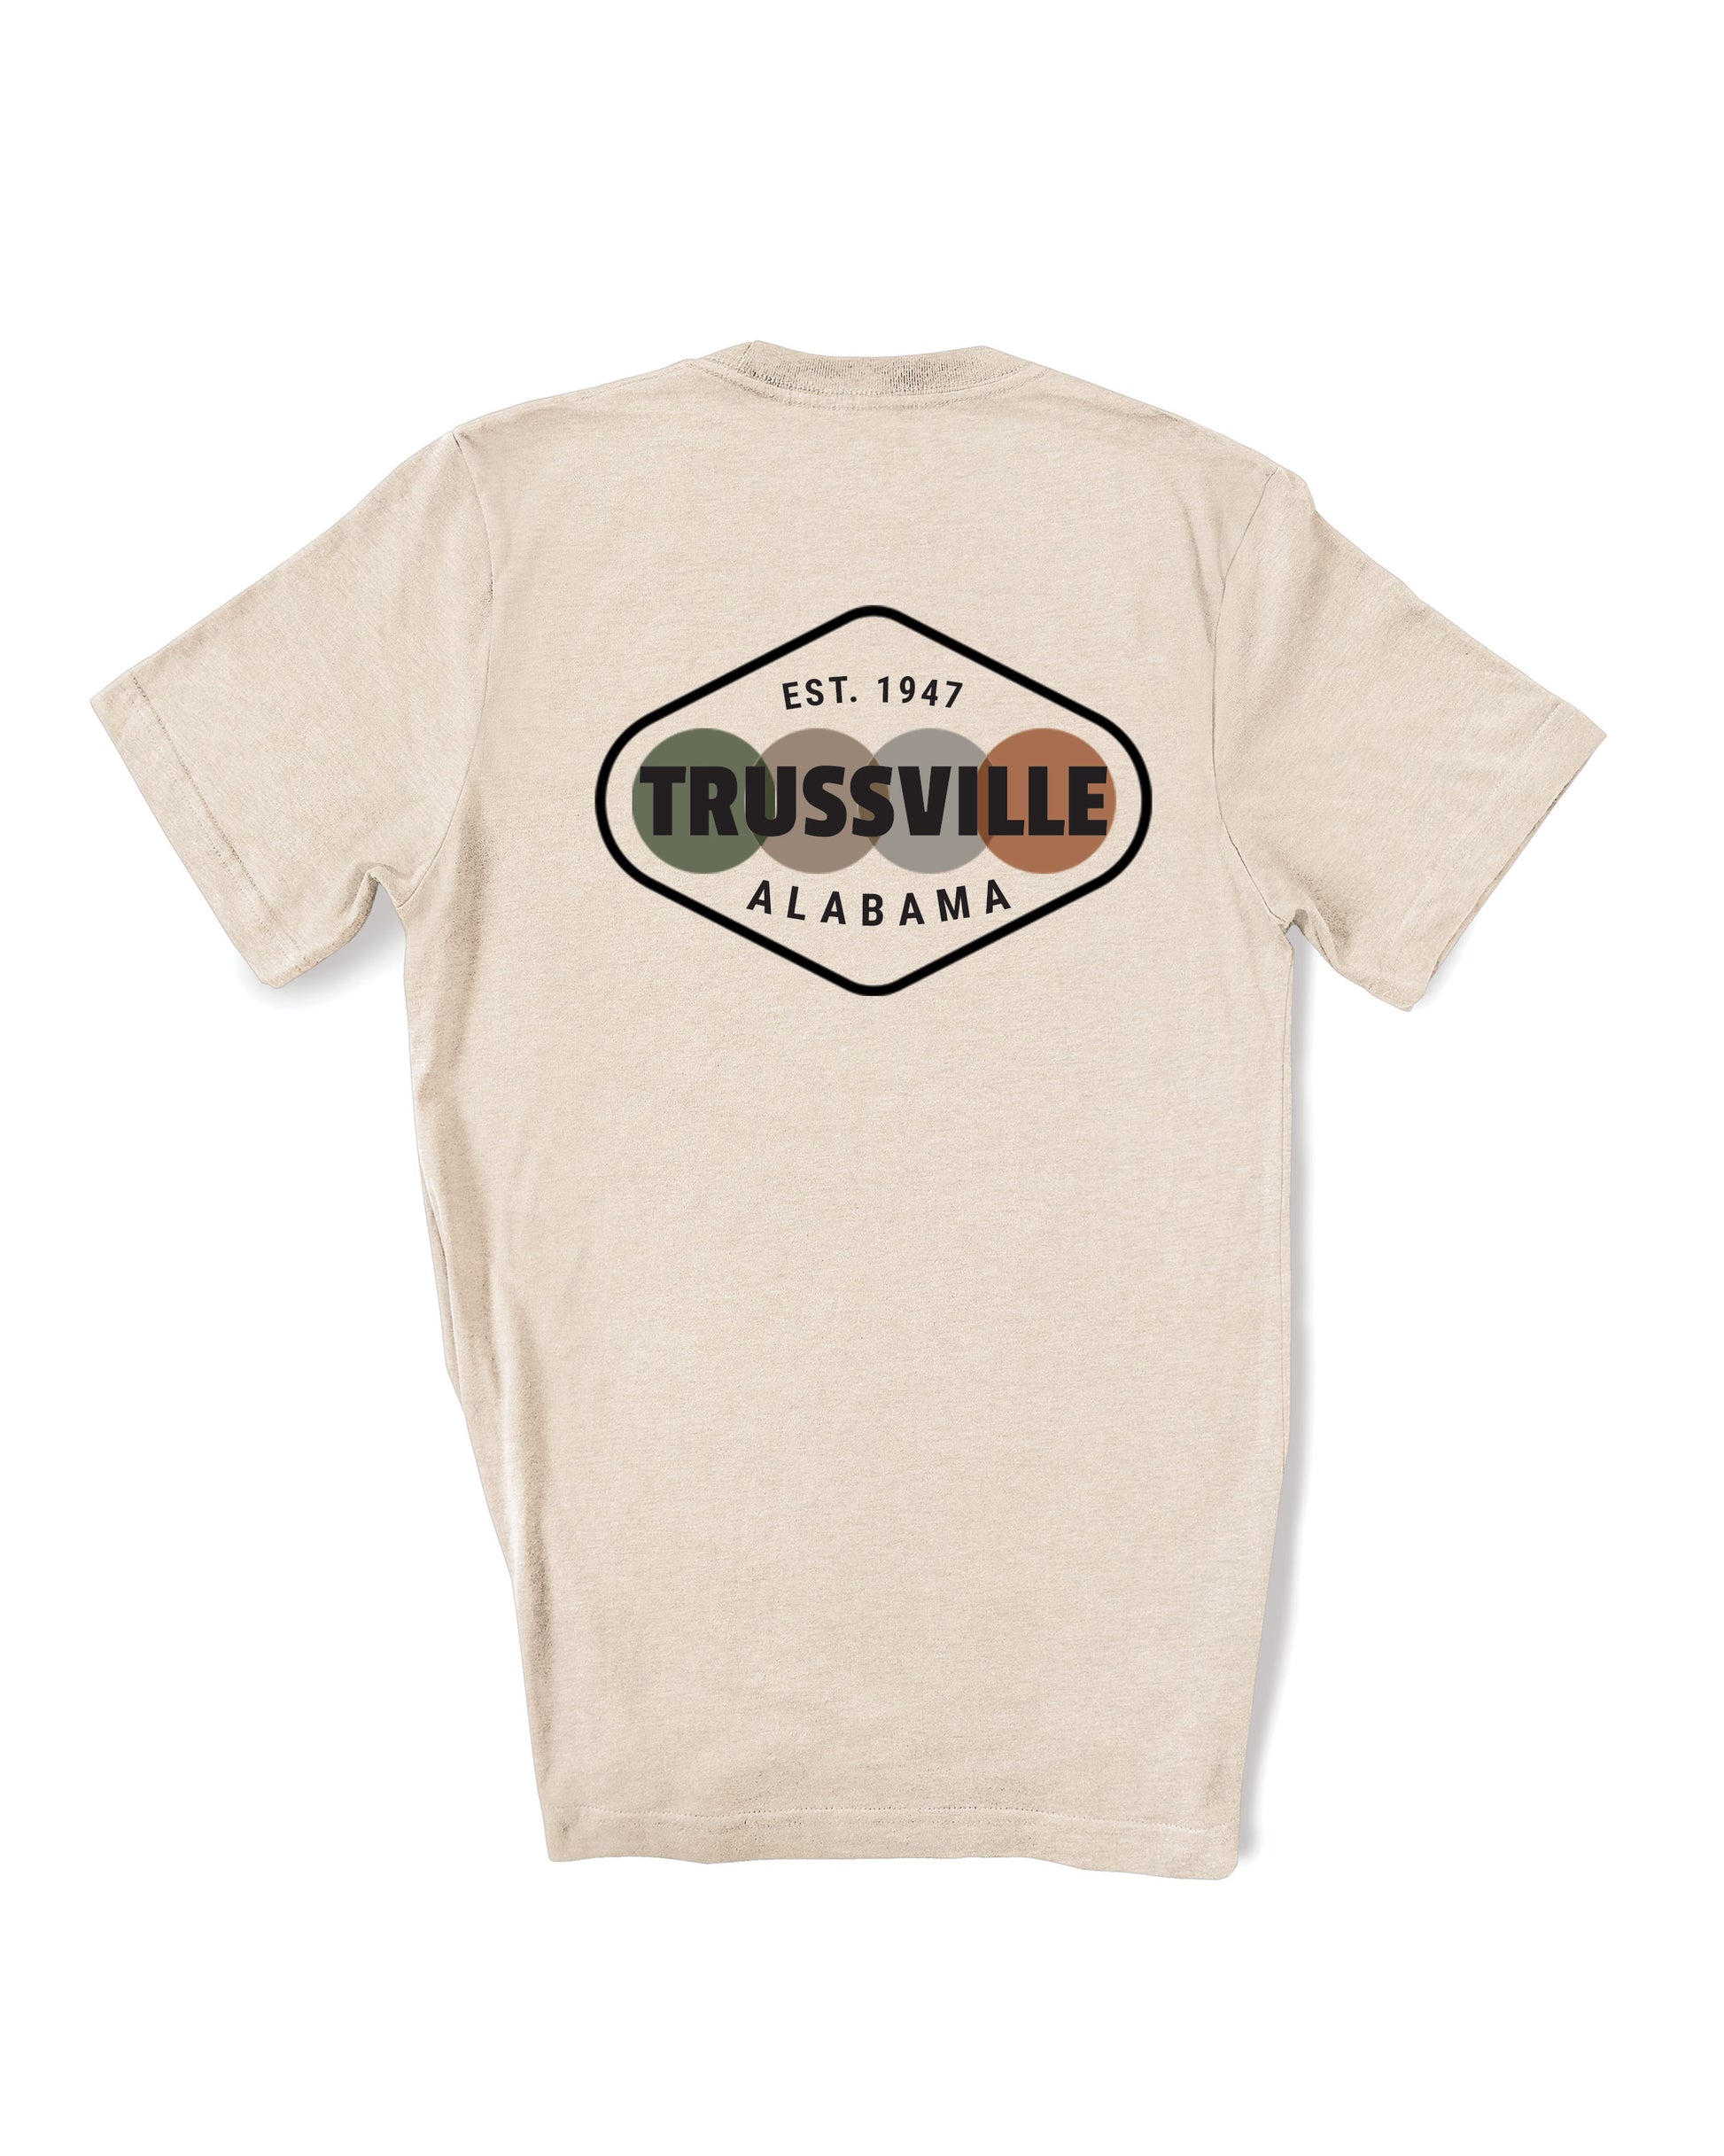 Customizable Circles | Tee | Adult-Sister Shirts-Sister Shirts, Cute & Custom Tees for Mama & Littles in Trussville, Alabama.